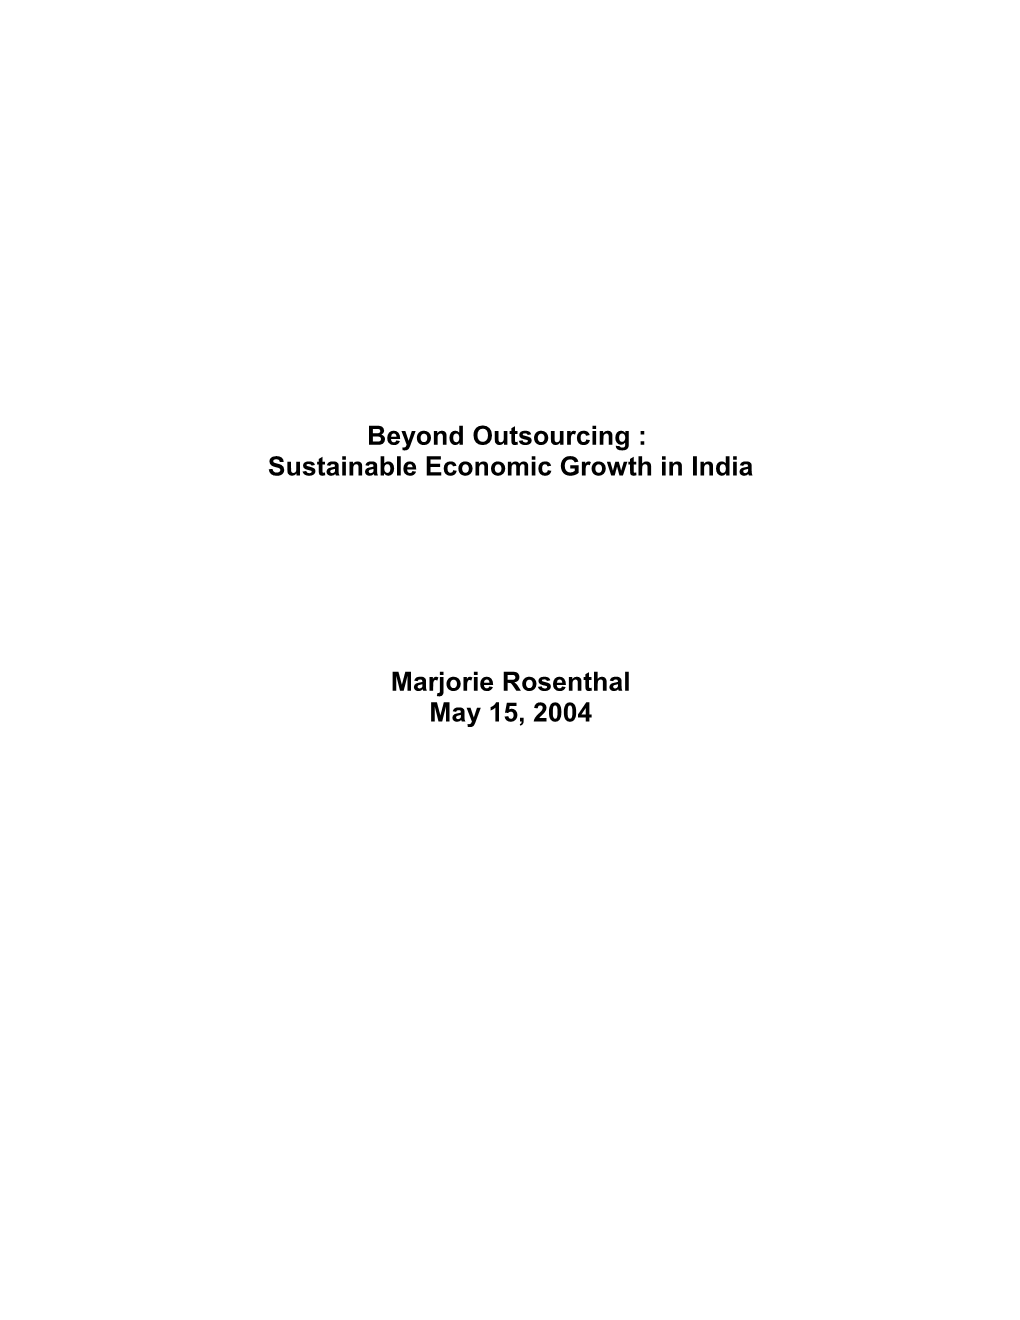 Sustainable Economic Growth in India